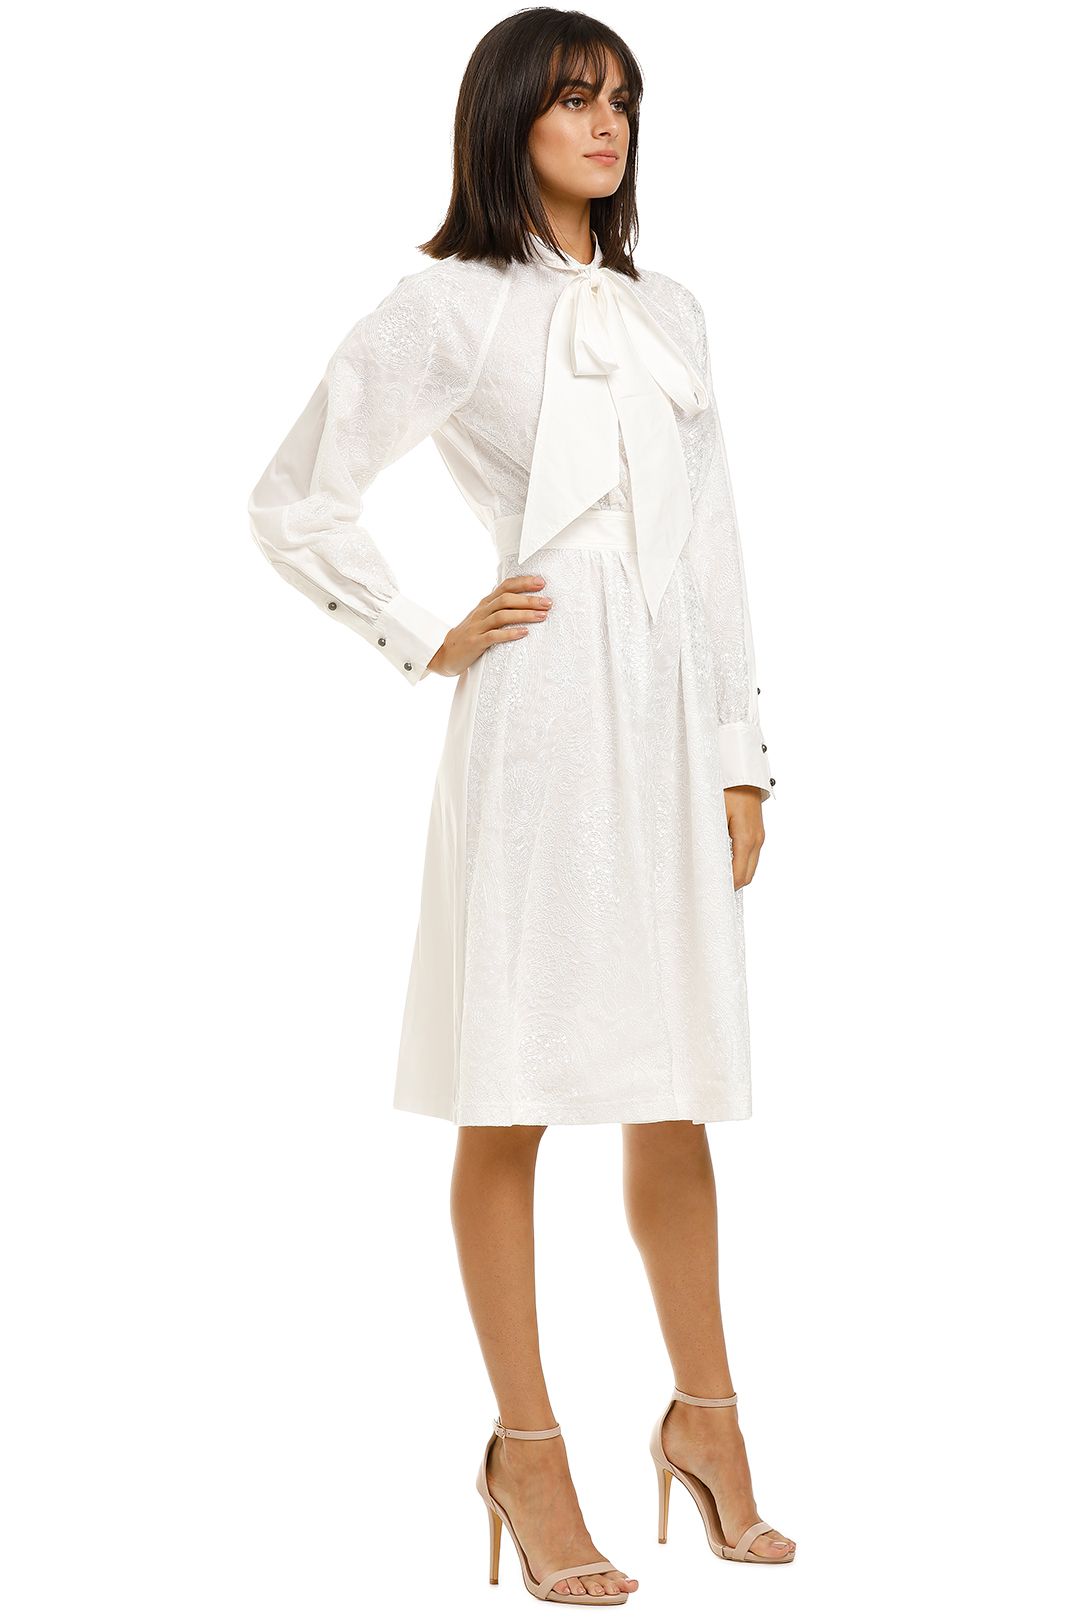 Leo-and-Lin-Serenity-Lace-Shirt-Dress-White-Side